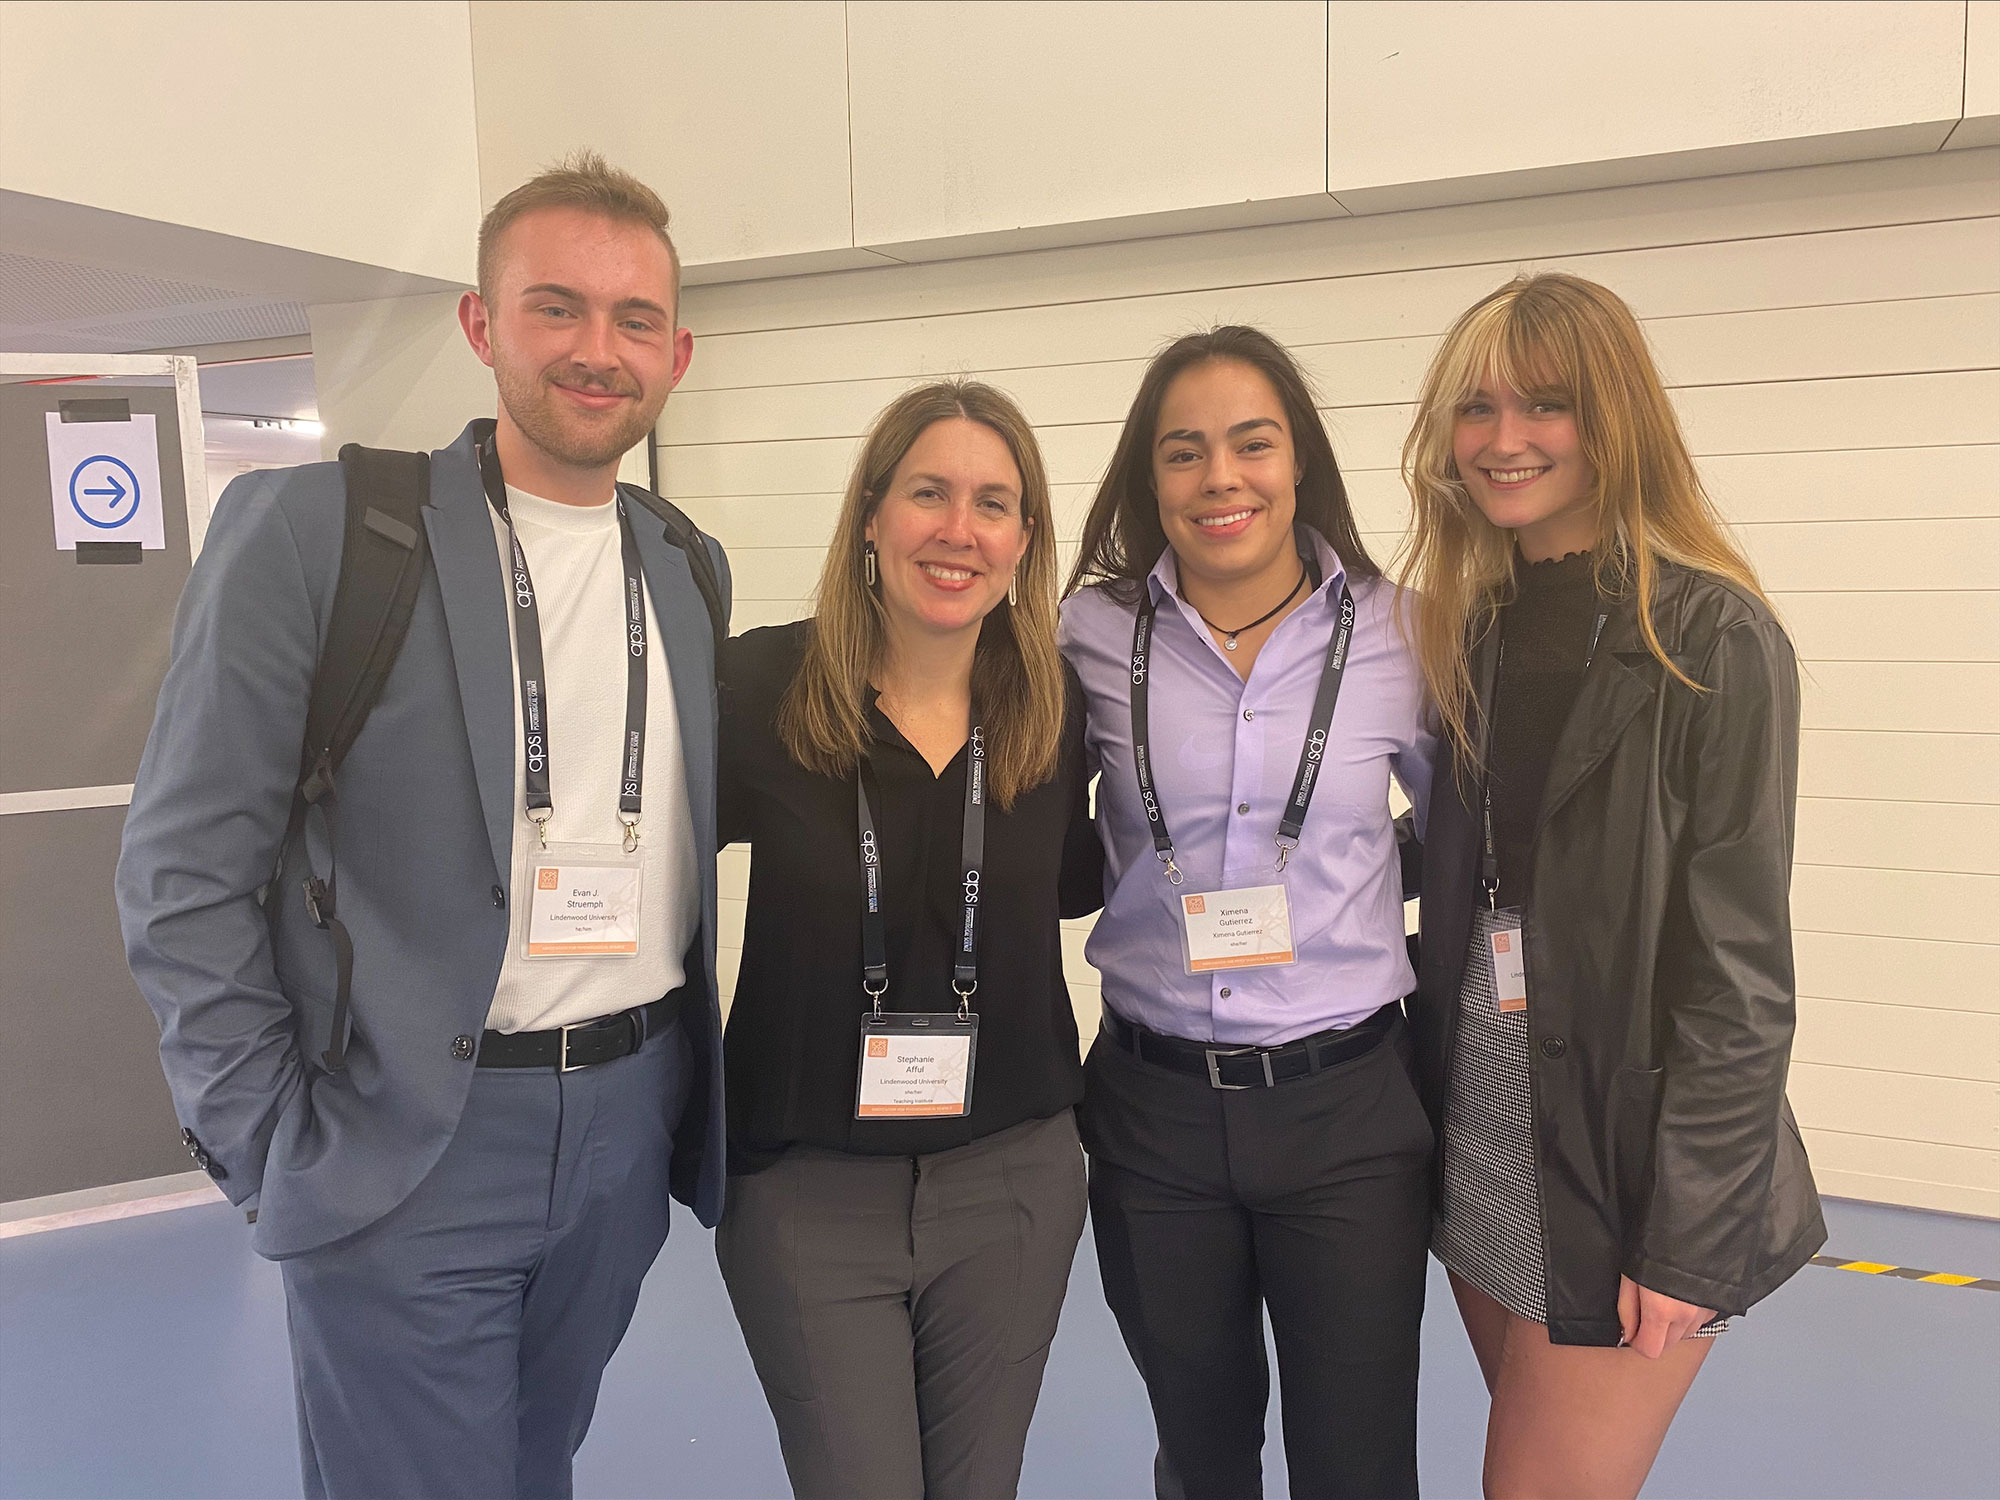 (From left to right) Evan Struemph, Dr. Stephanie Afful, Ximena Gutierrez, and Zoe Sweeney at conference in Brussels.